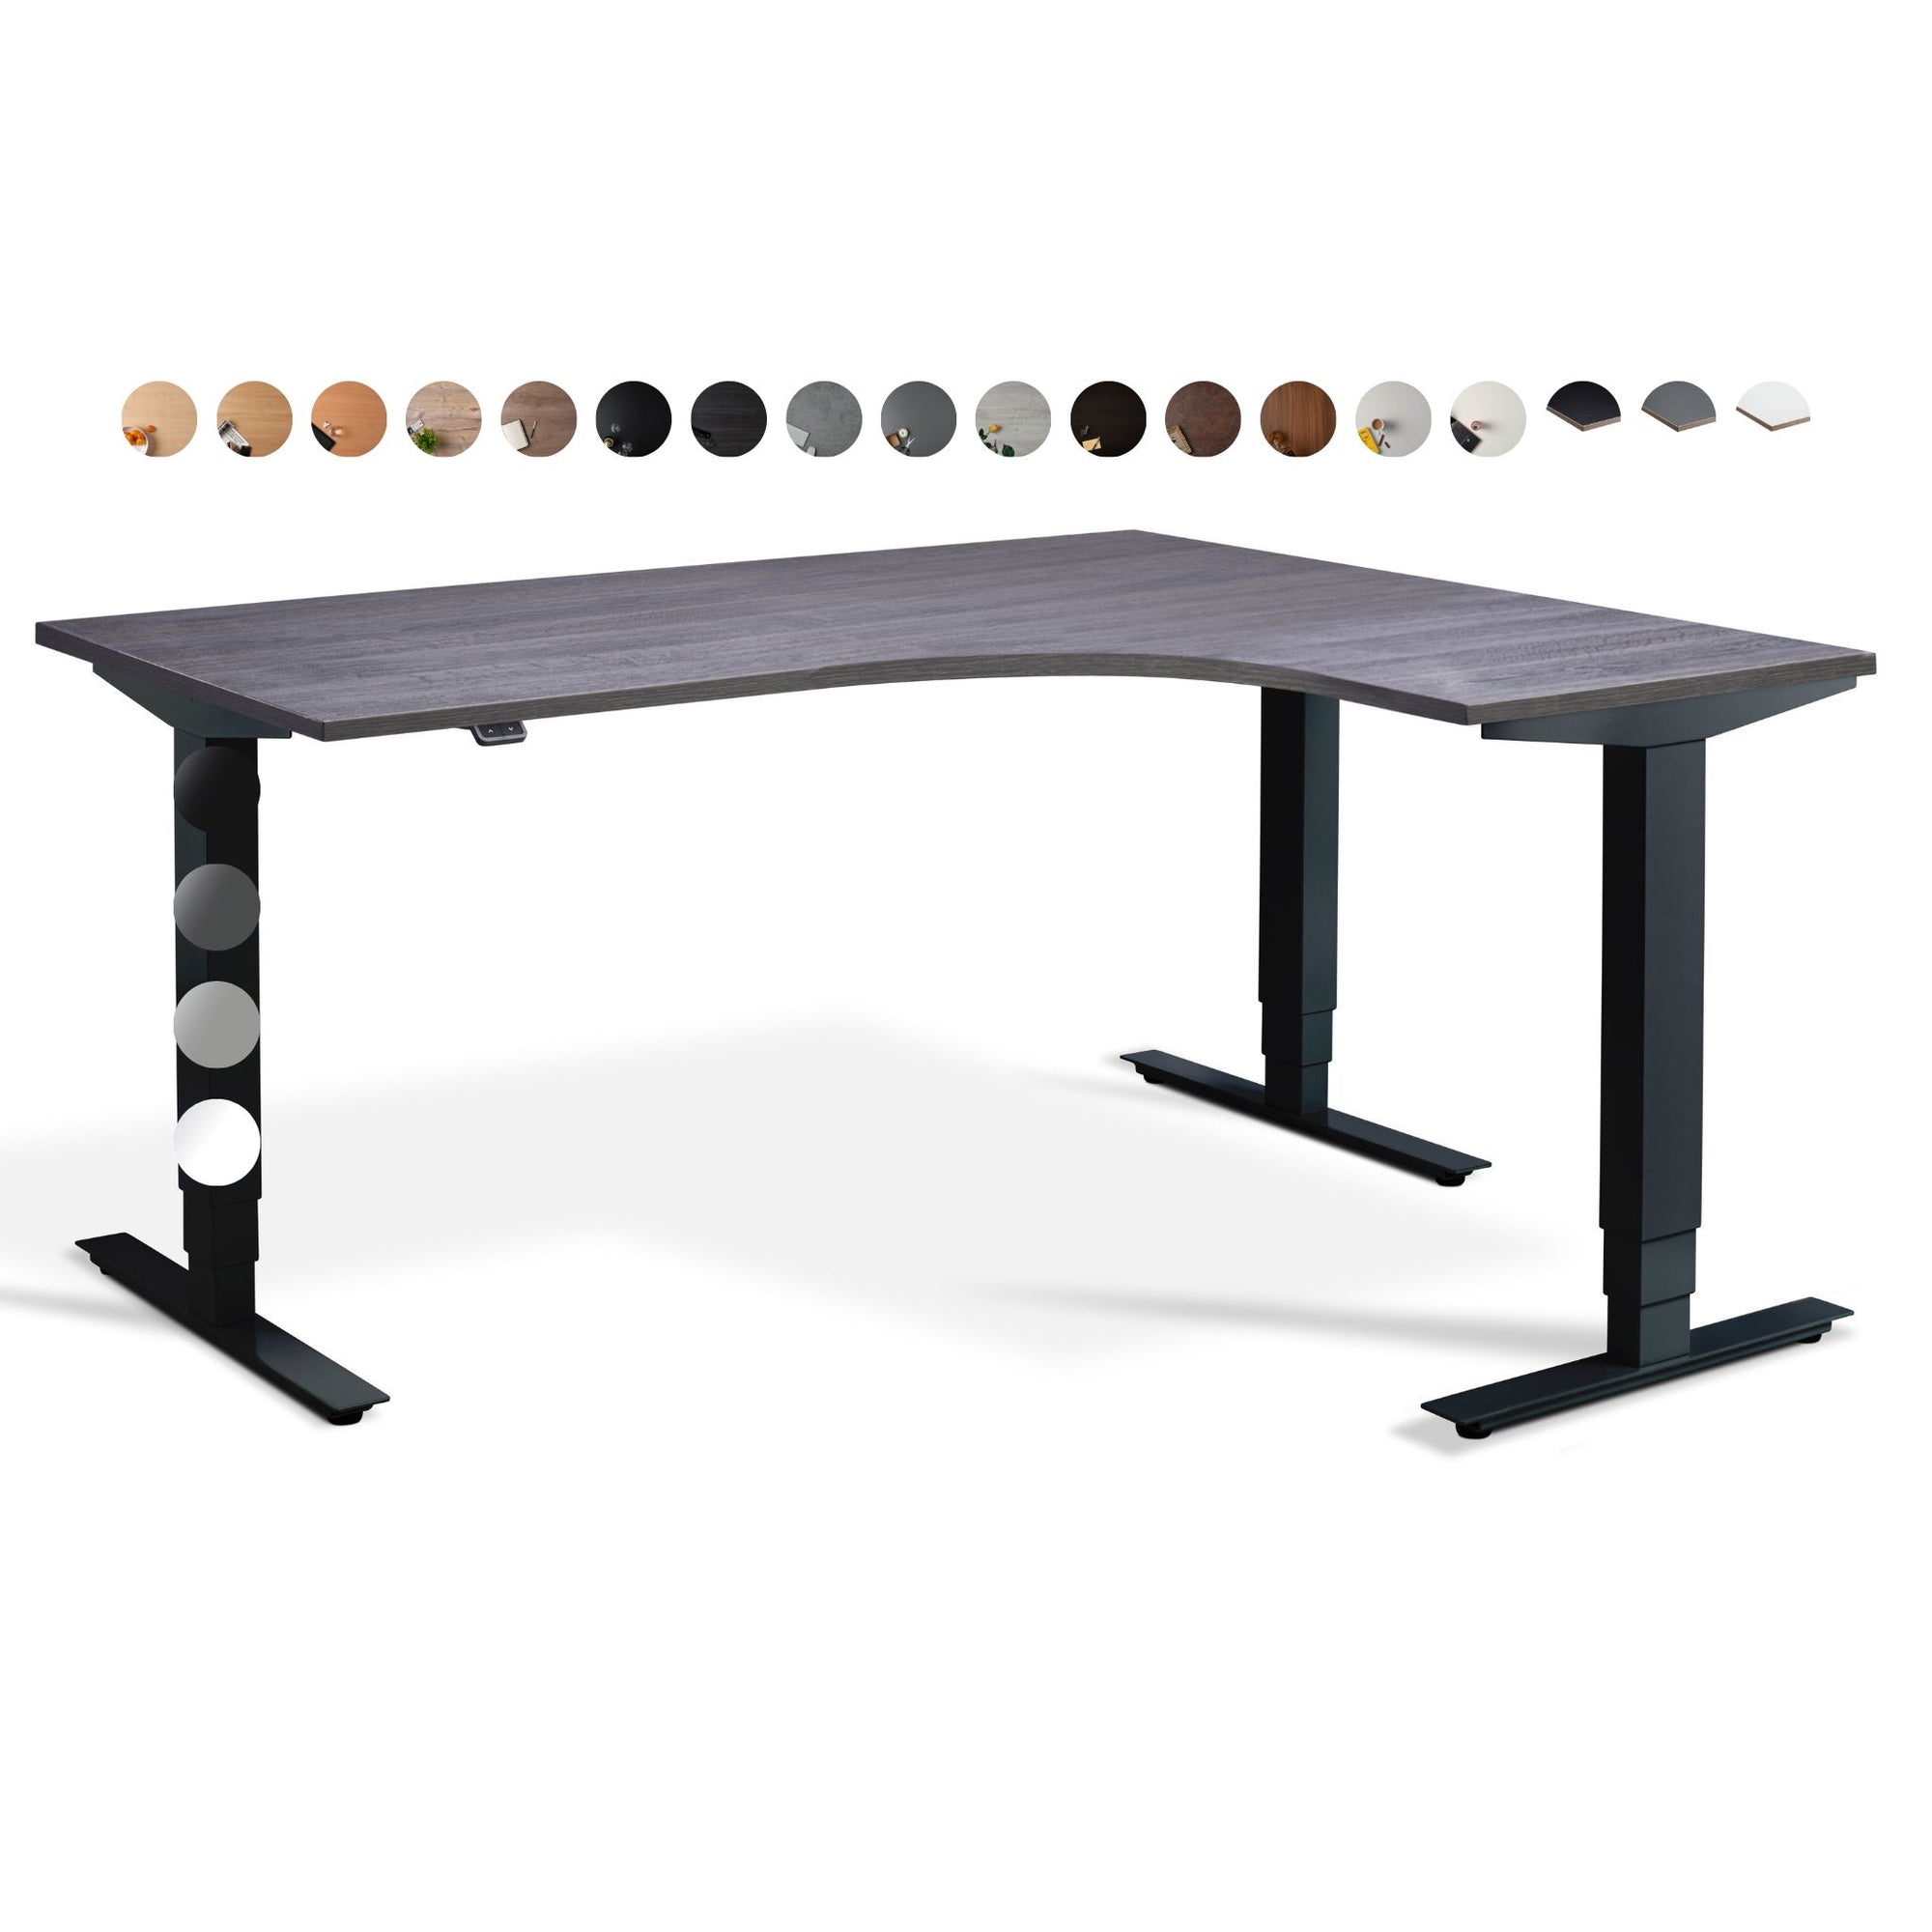 Masta corner radial standing desk available in multiple top and frame finishes